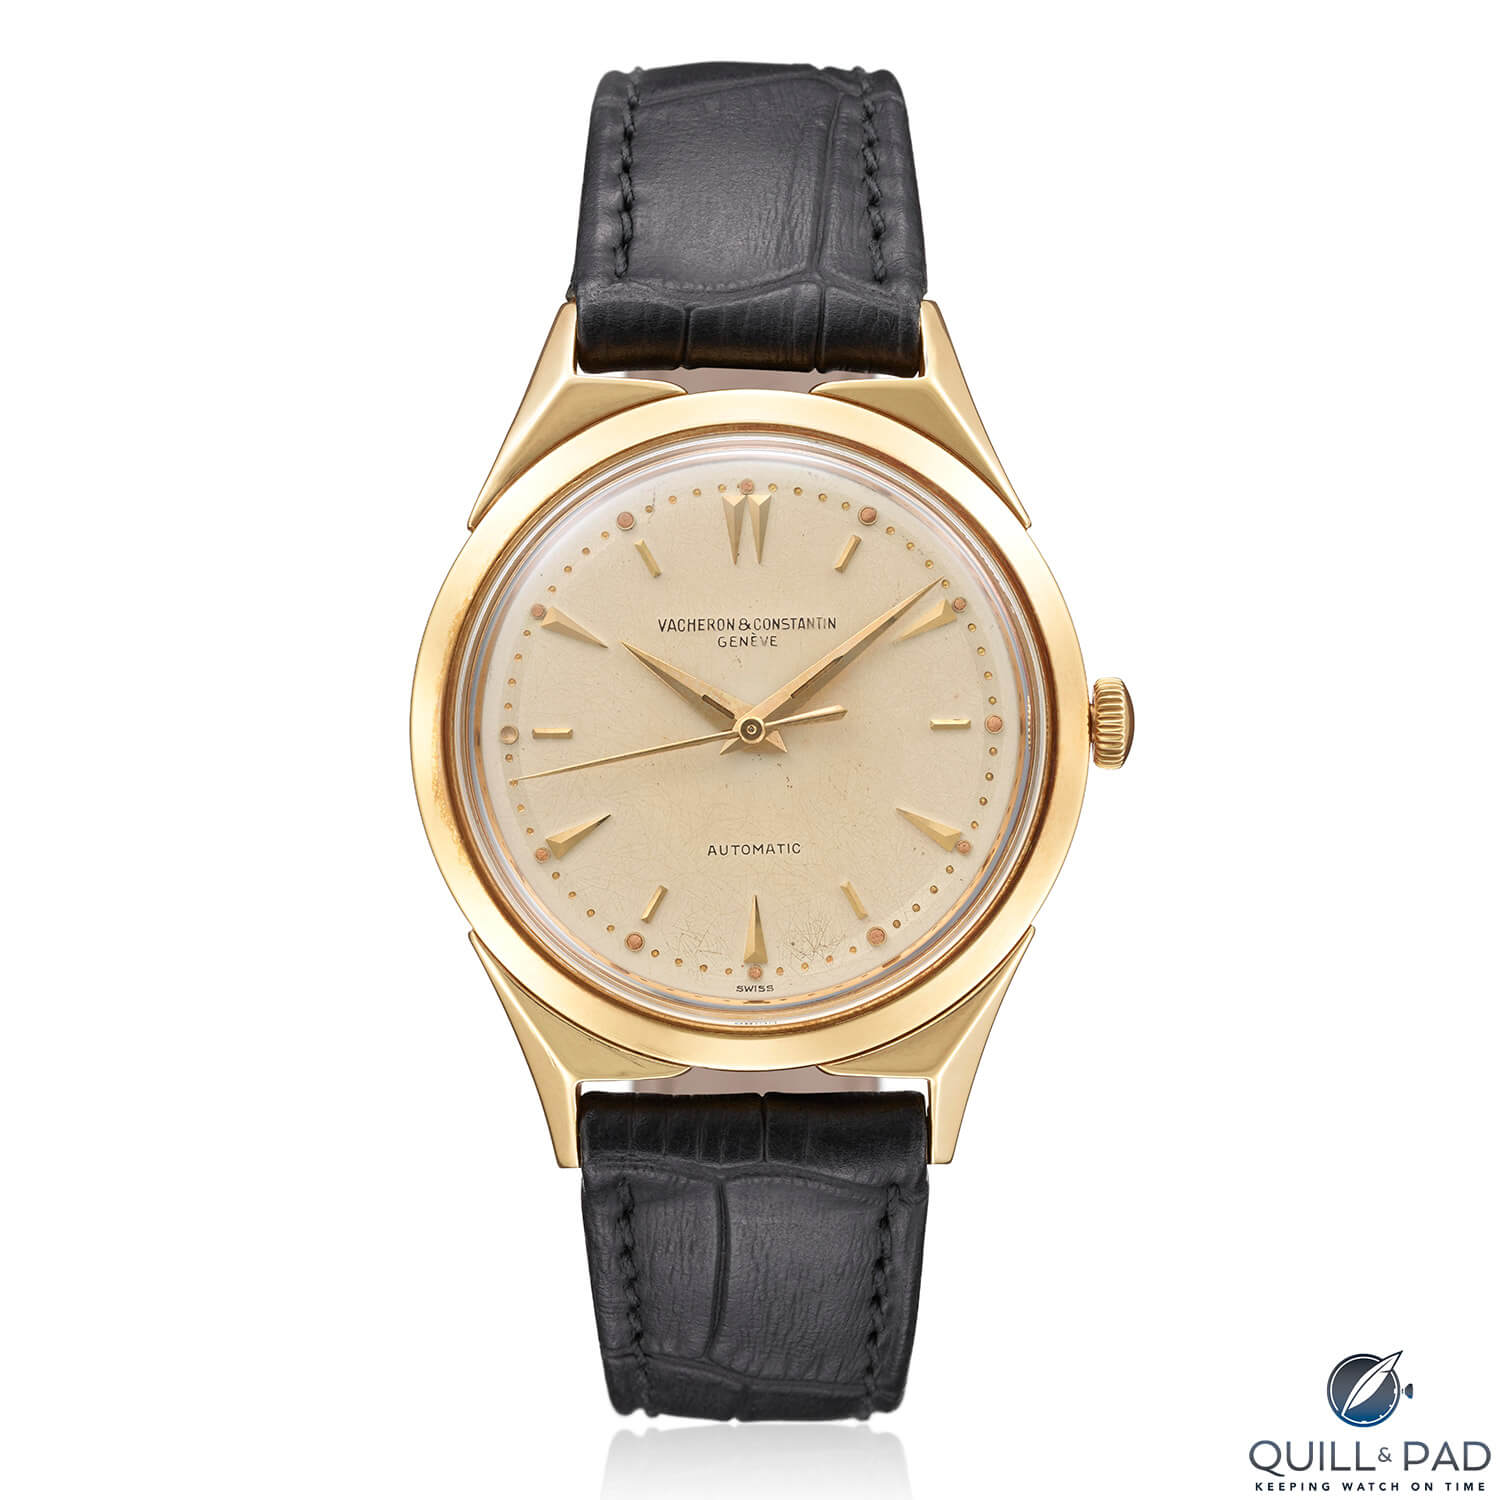 Vacheron Constantin Reference 6073 from 1956